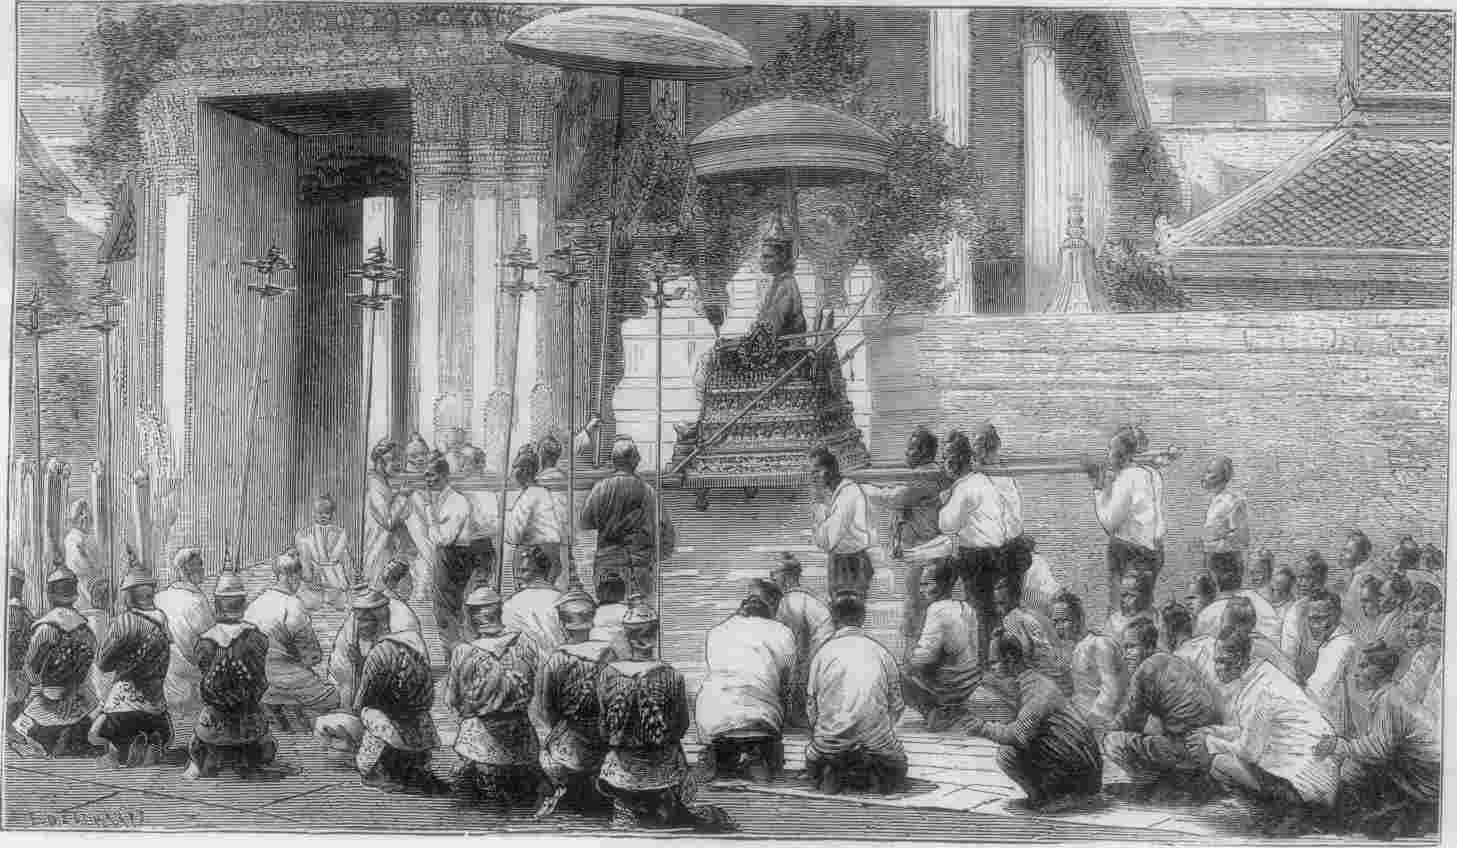 The King of Siam Returning to His Palace.